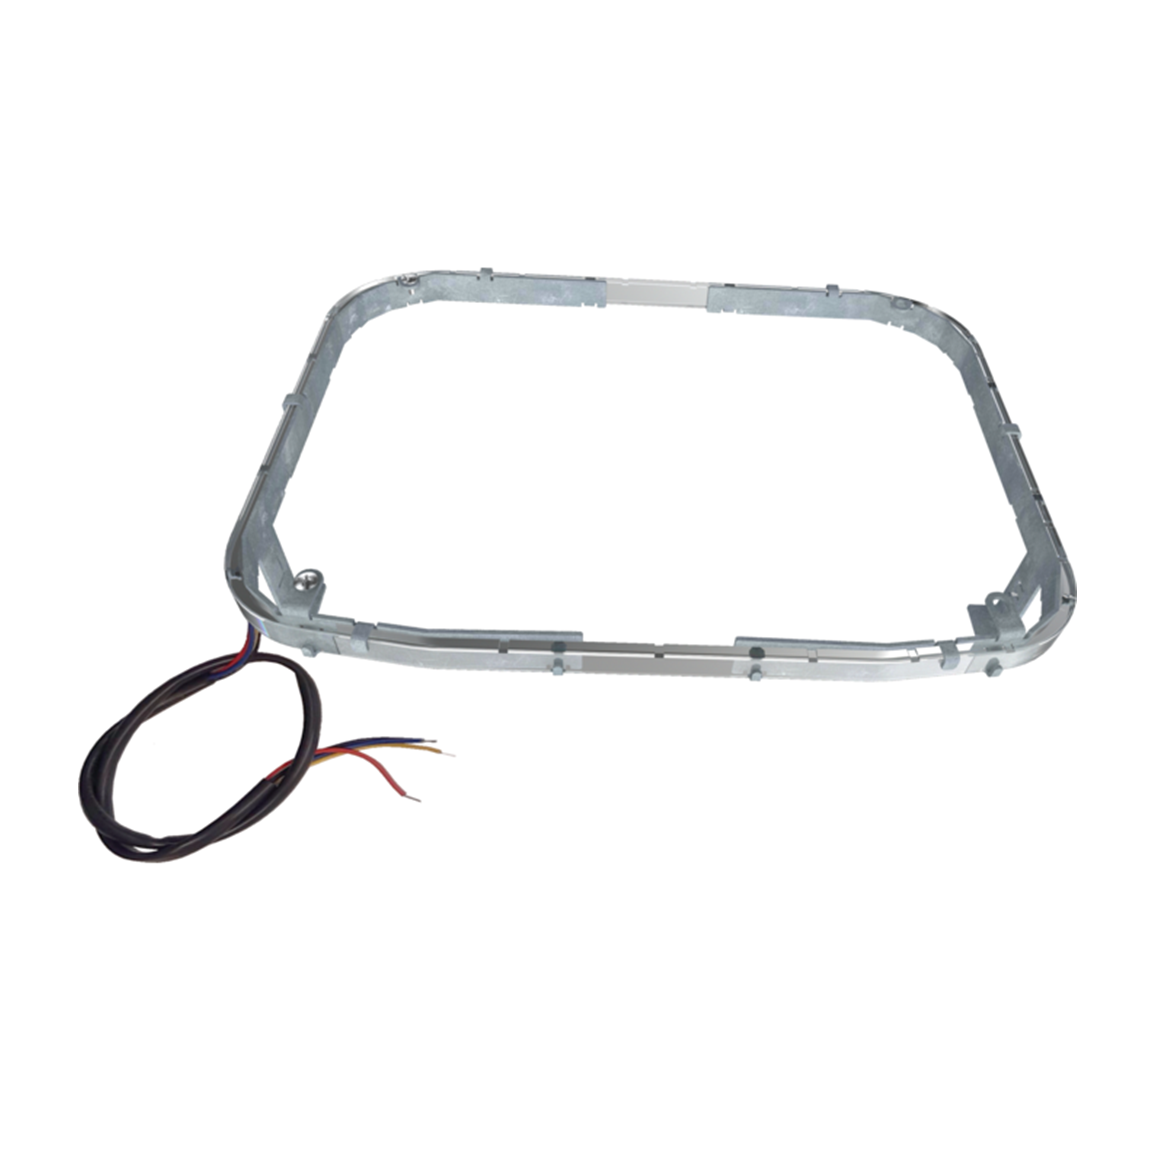 CAME Replacement LED Light Strip For GT8 Barrier Crown